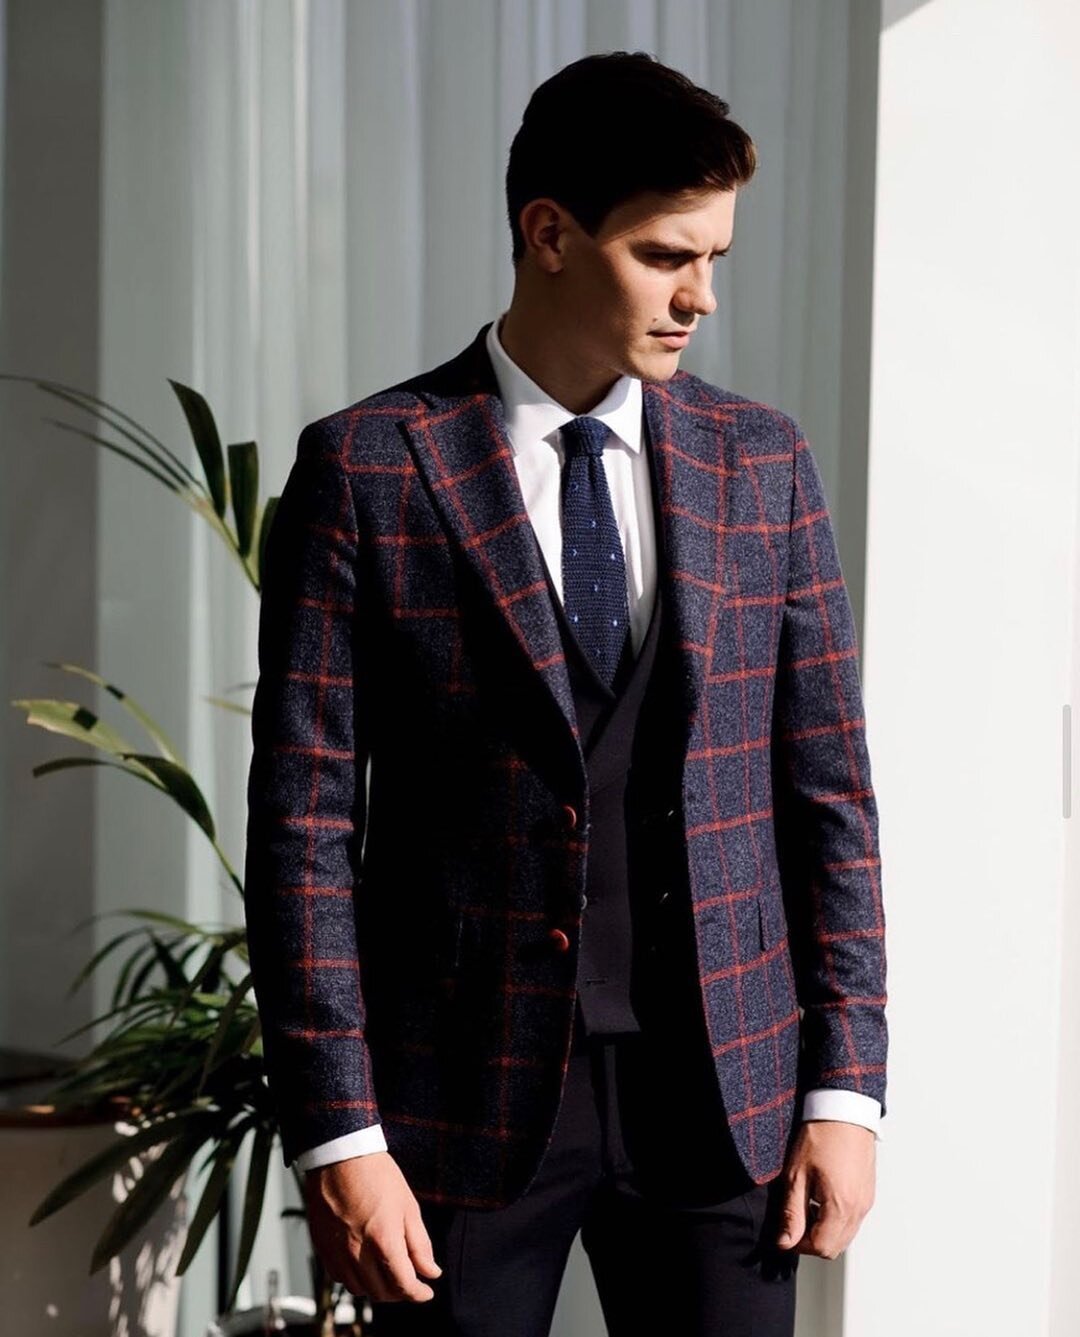 Discover the comfort and elegance of Alessandro Pires sport coats and blazers.⁣
⁣
We offer a unique collection of fabrics specifically milled for a distinctive sports jacket. Options range widely, from heavier worsted wools and flannels to silks and 